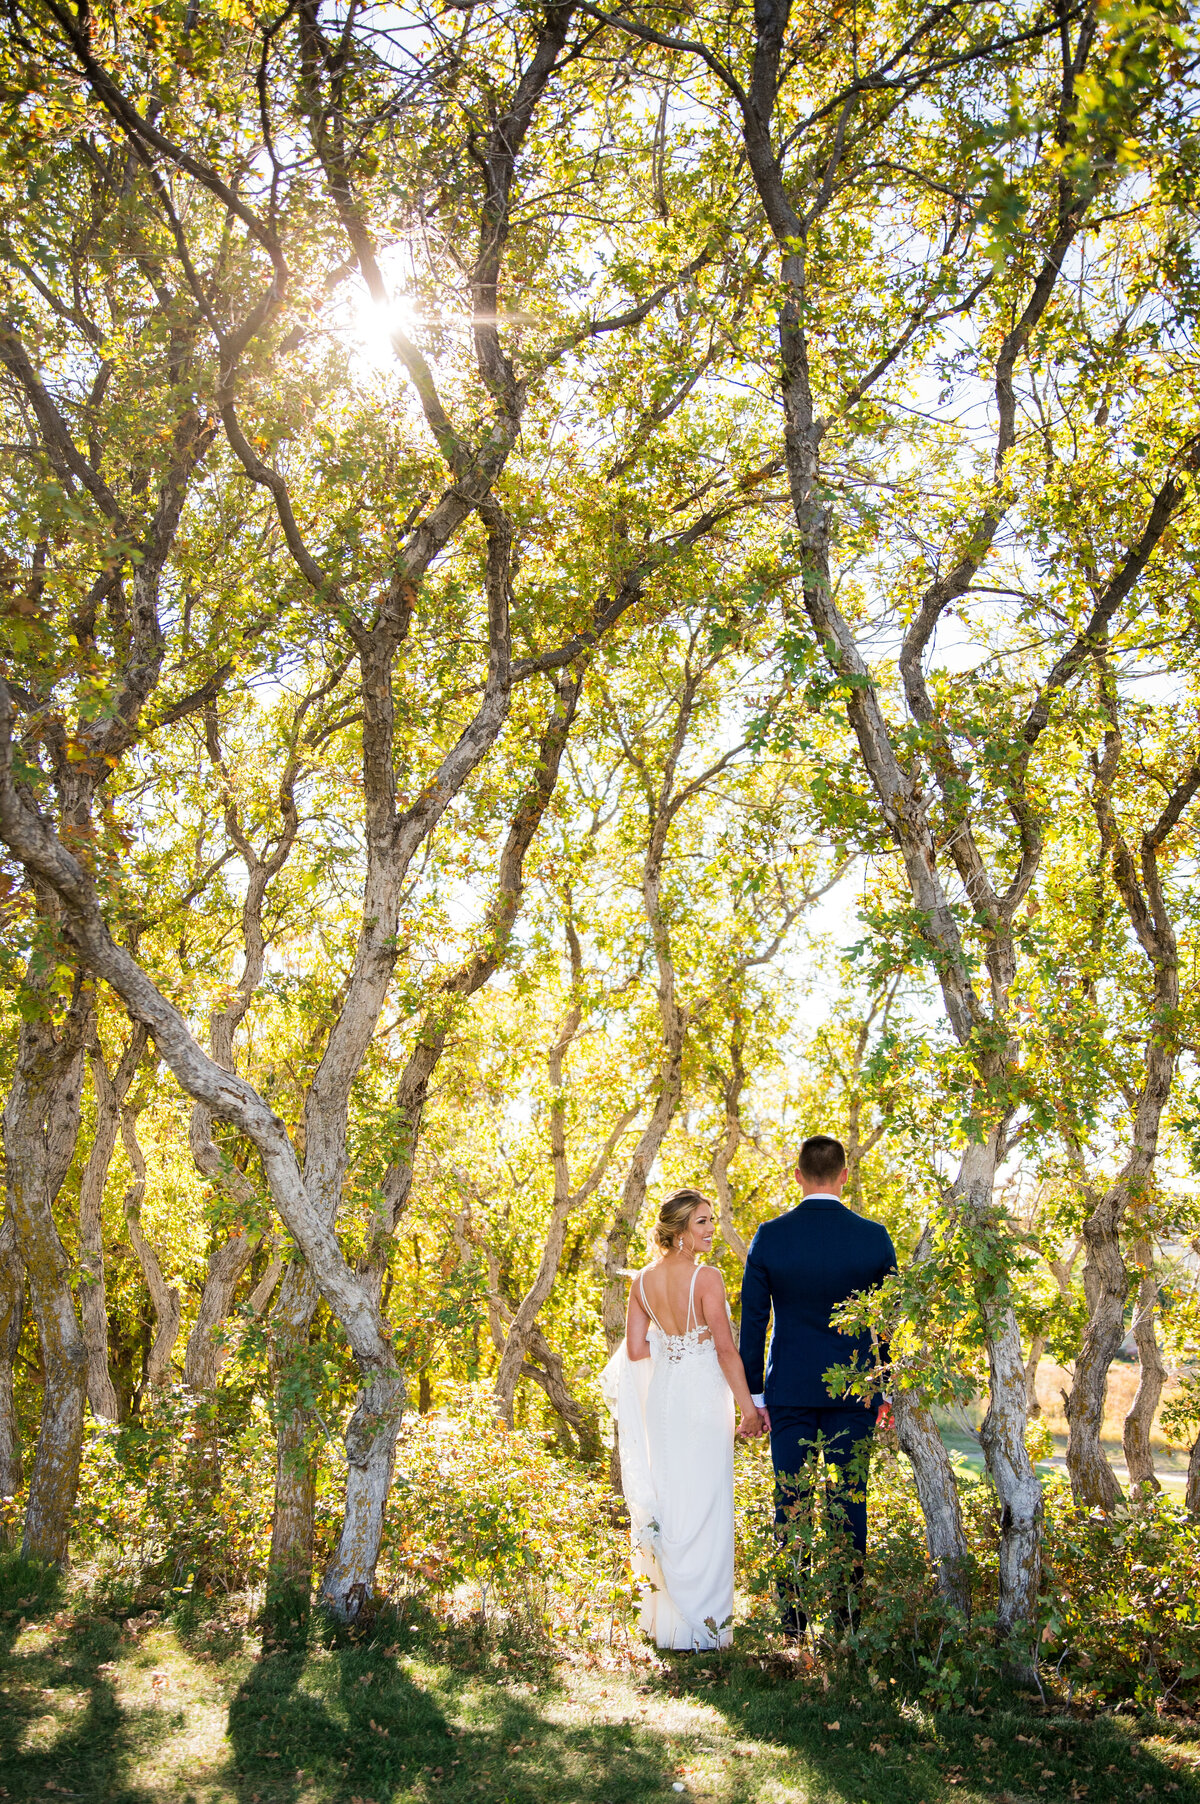 A bride and groom stand in the oak trees at The Oaks at Plum Creek and the bride looks up at her groom.